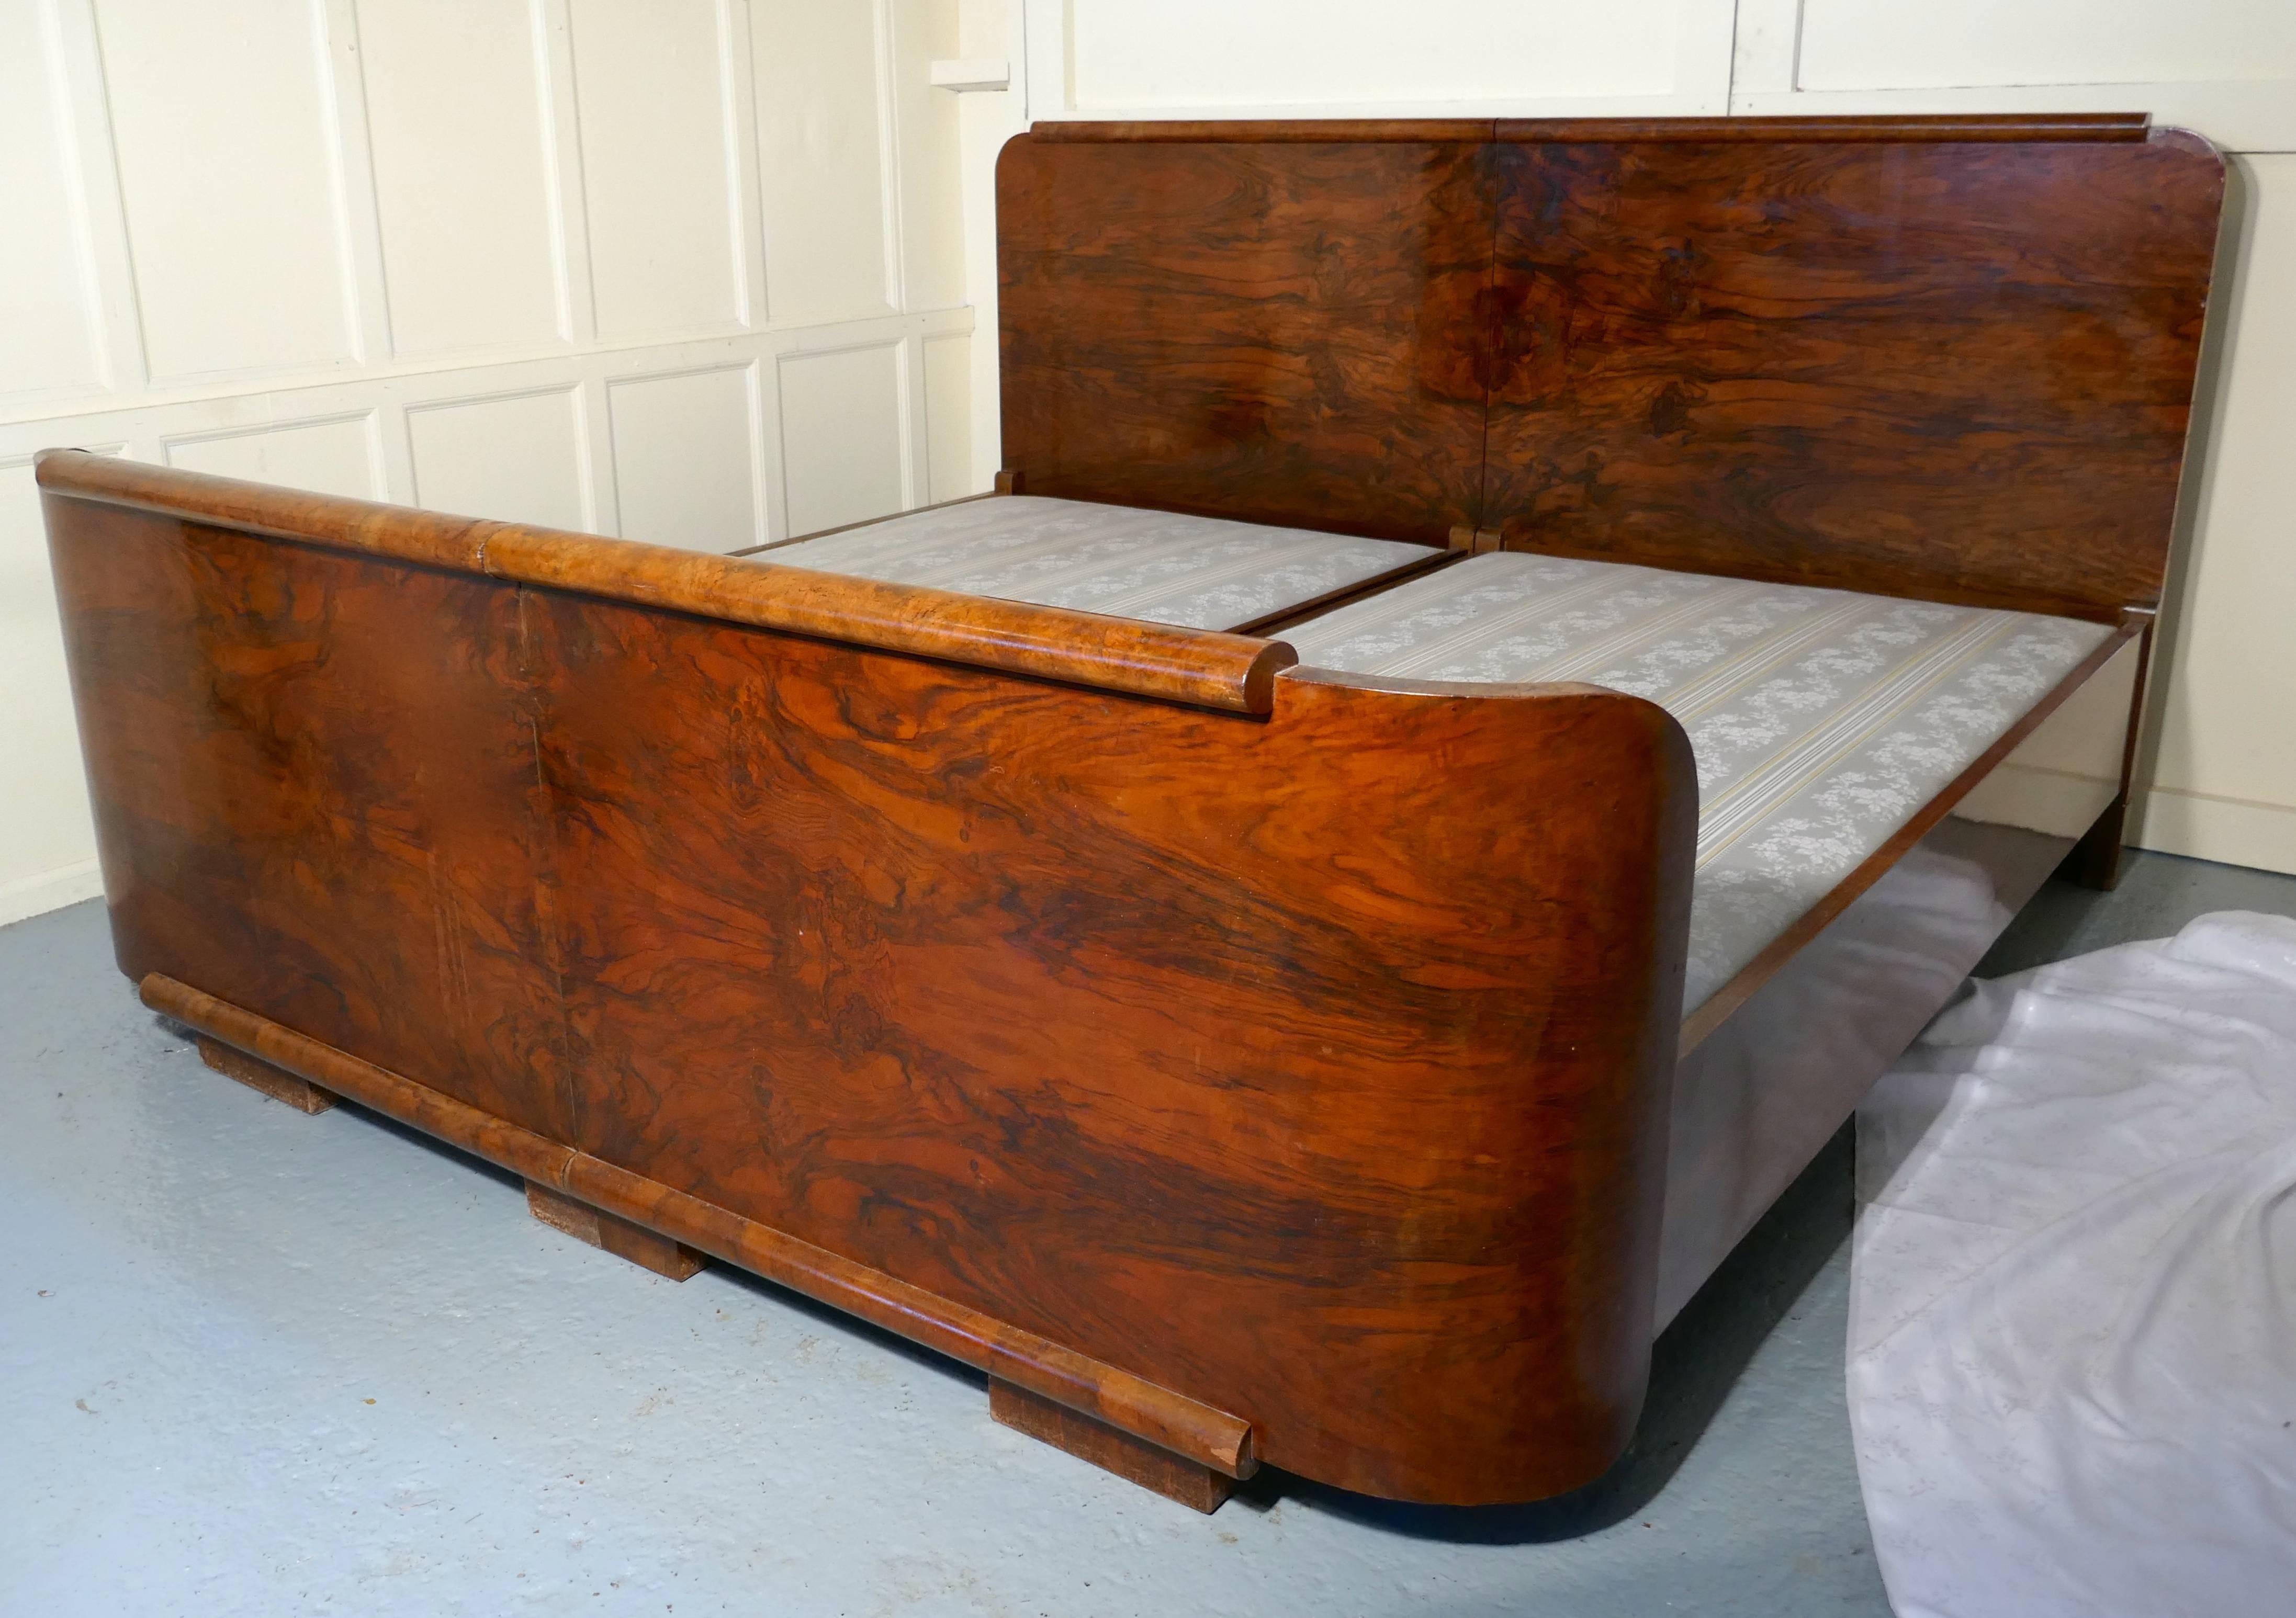 20th Century Burr Walnut Art Deco French King-Size Double Bed or Twin Beds